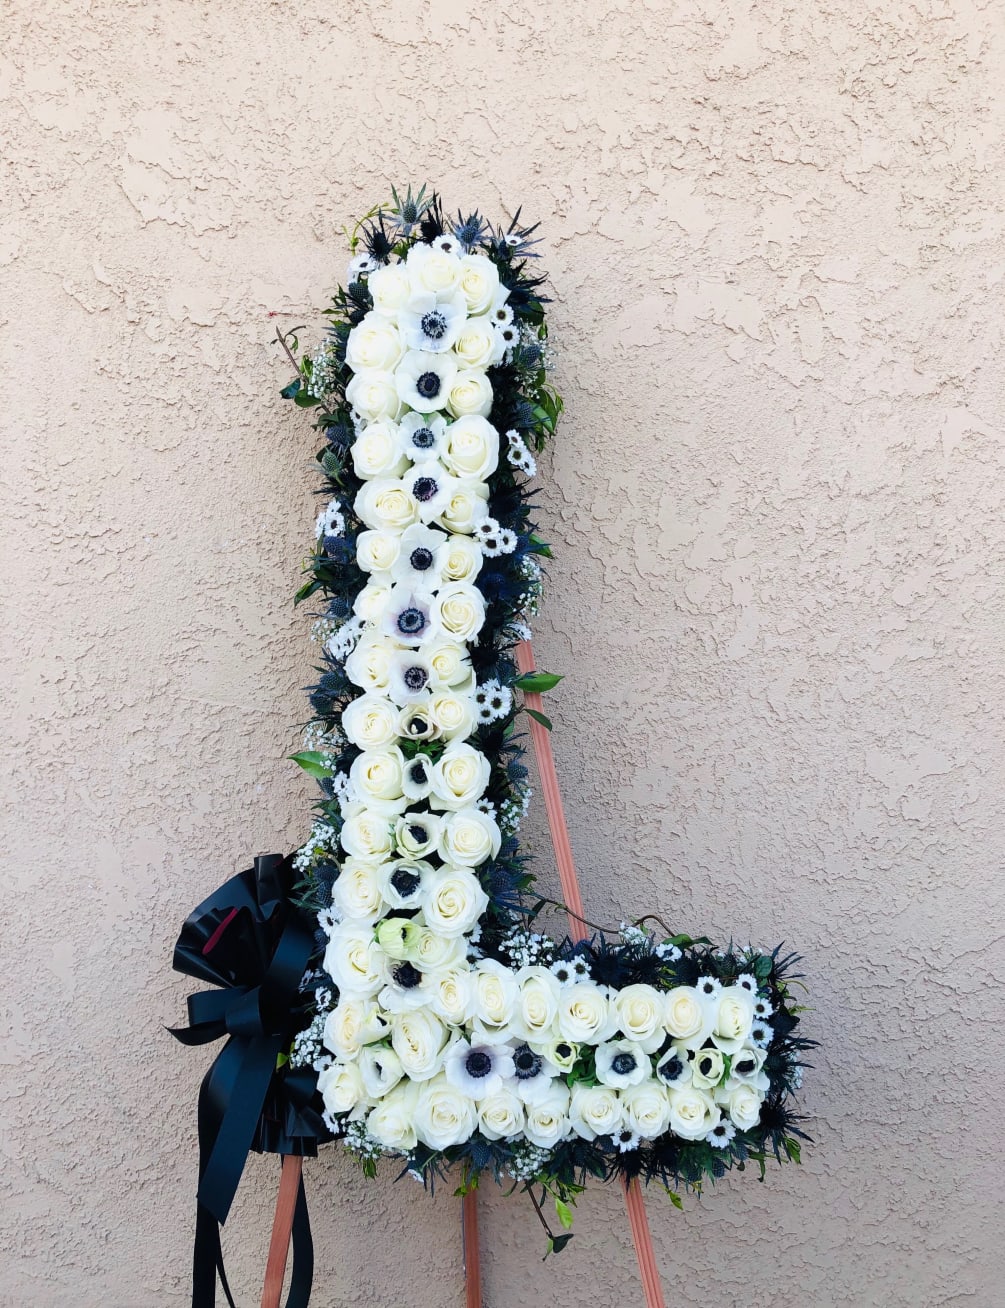 Fresh floral letter is a nice gift for many occasions. CUSTOMER CAN